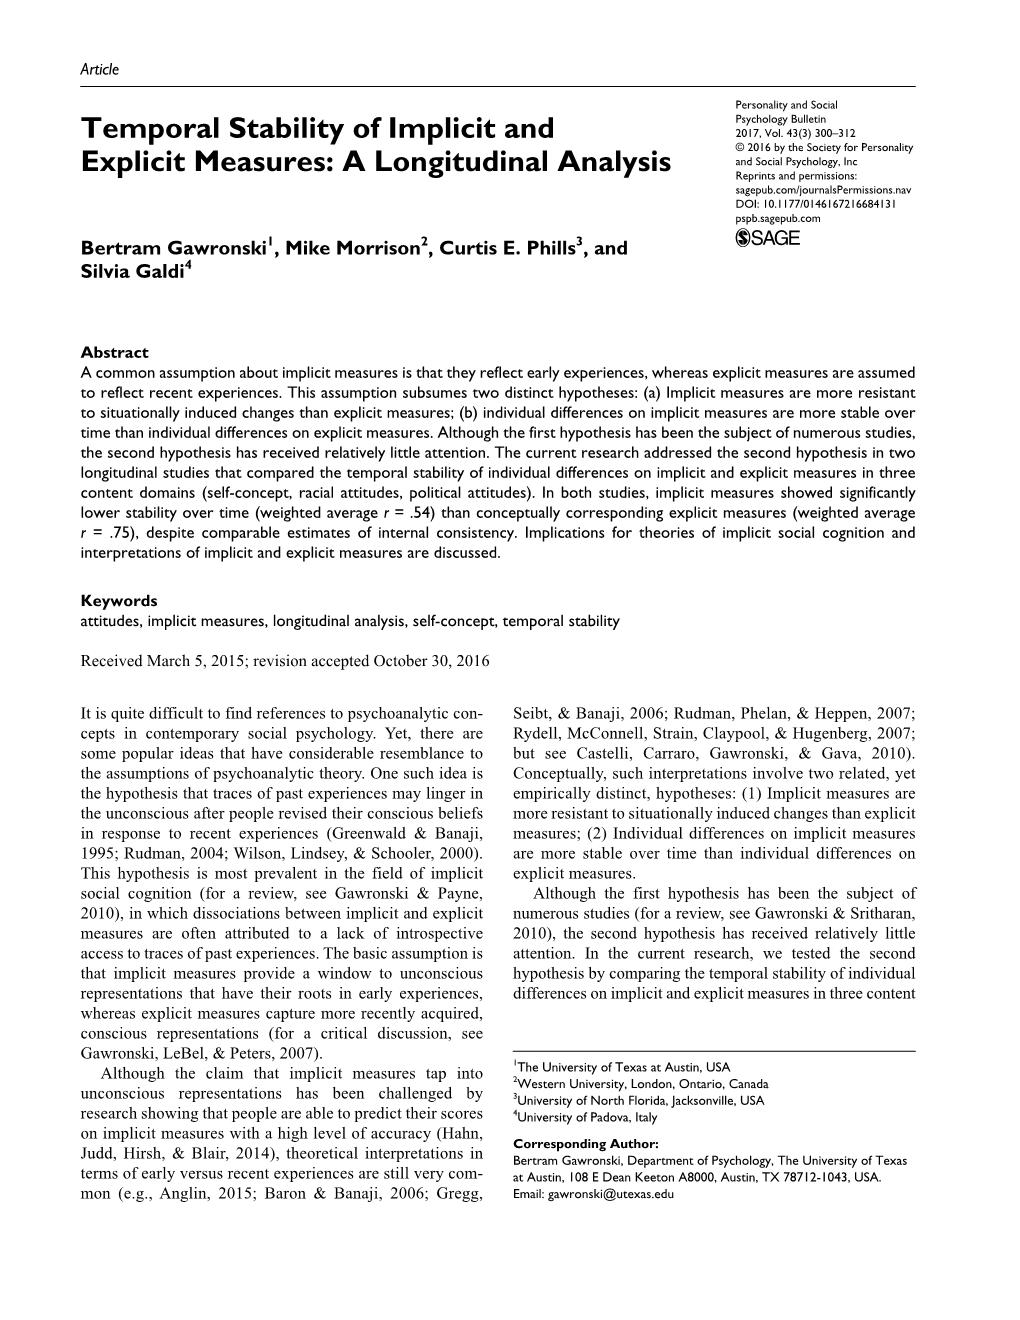 Temporal Stability of Implicit and Explicit Measures